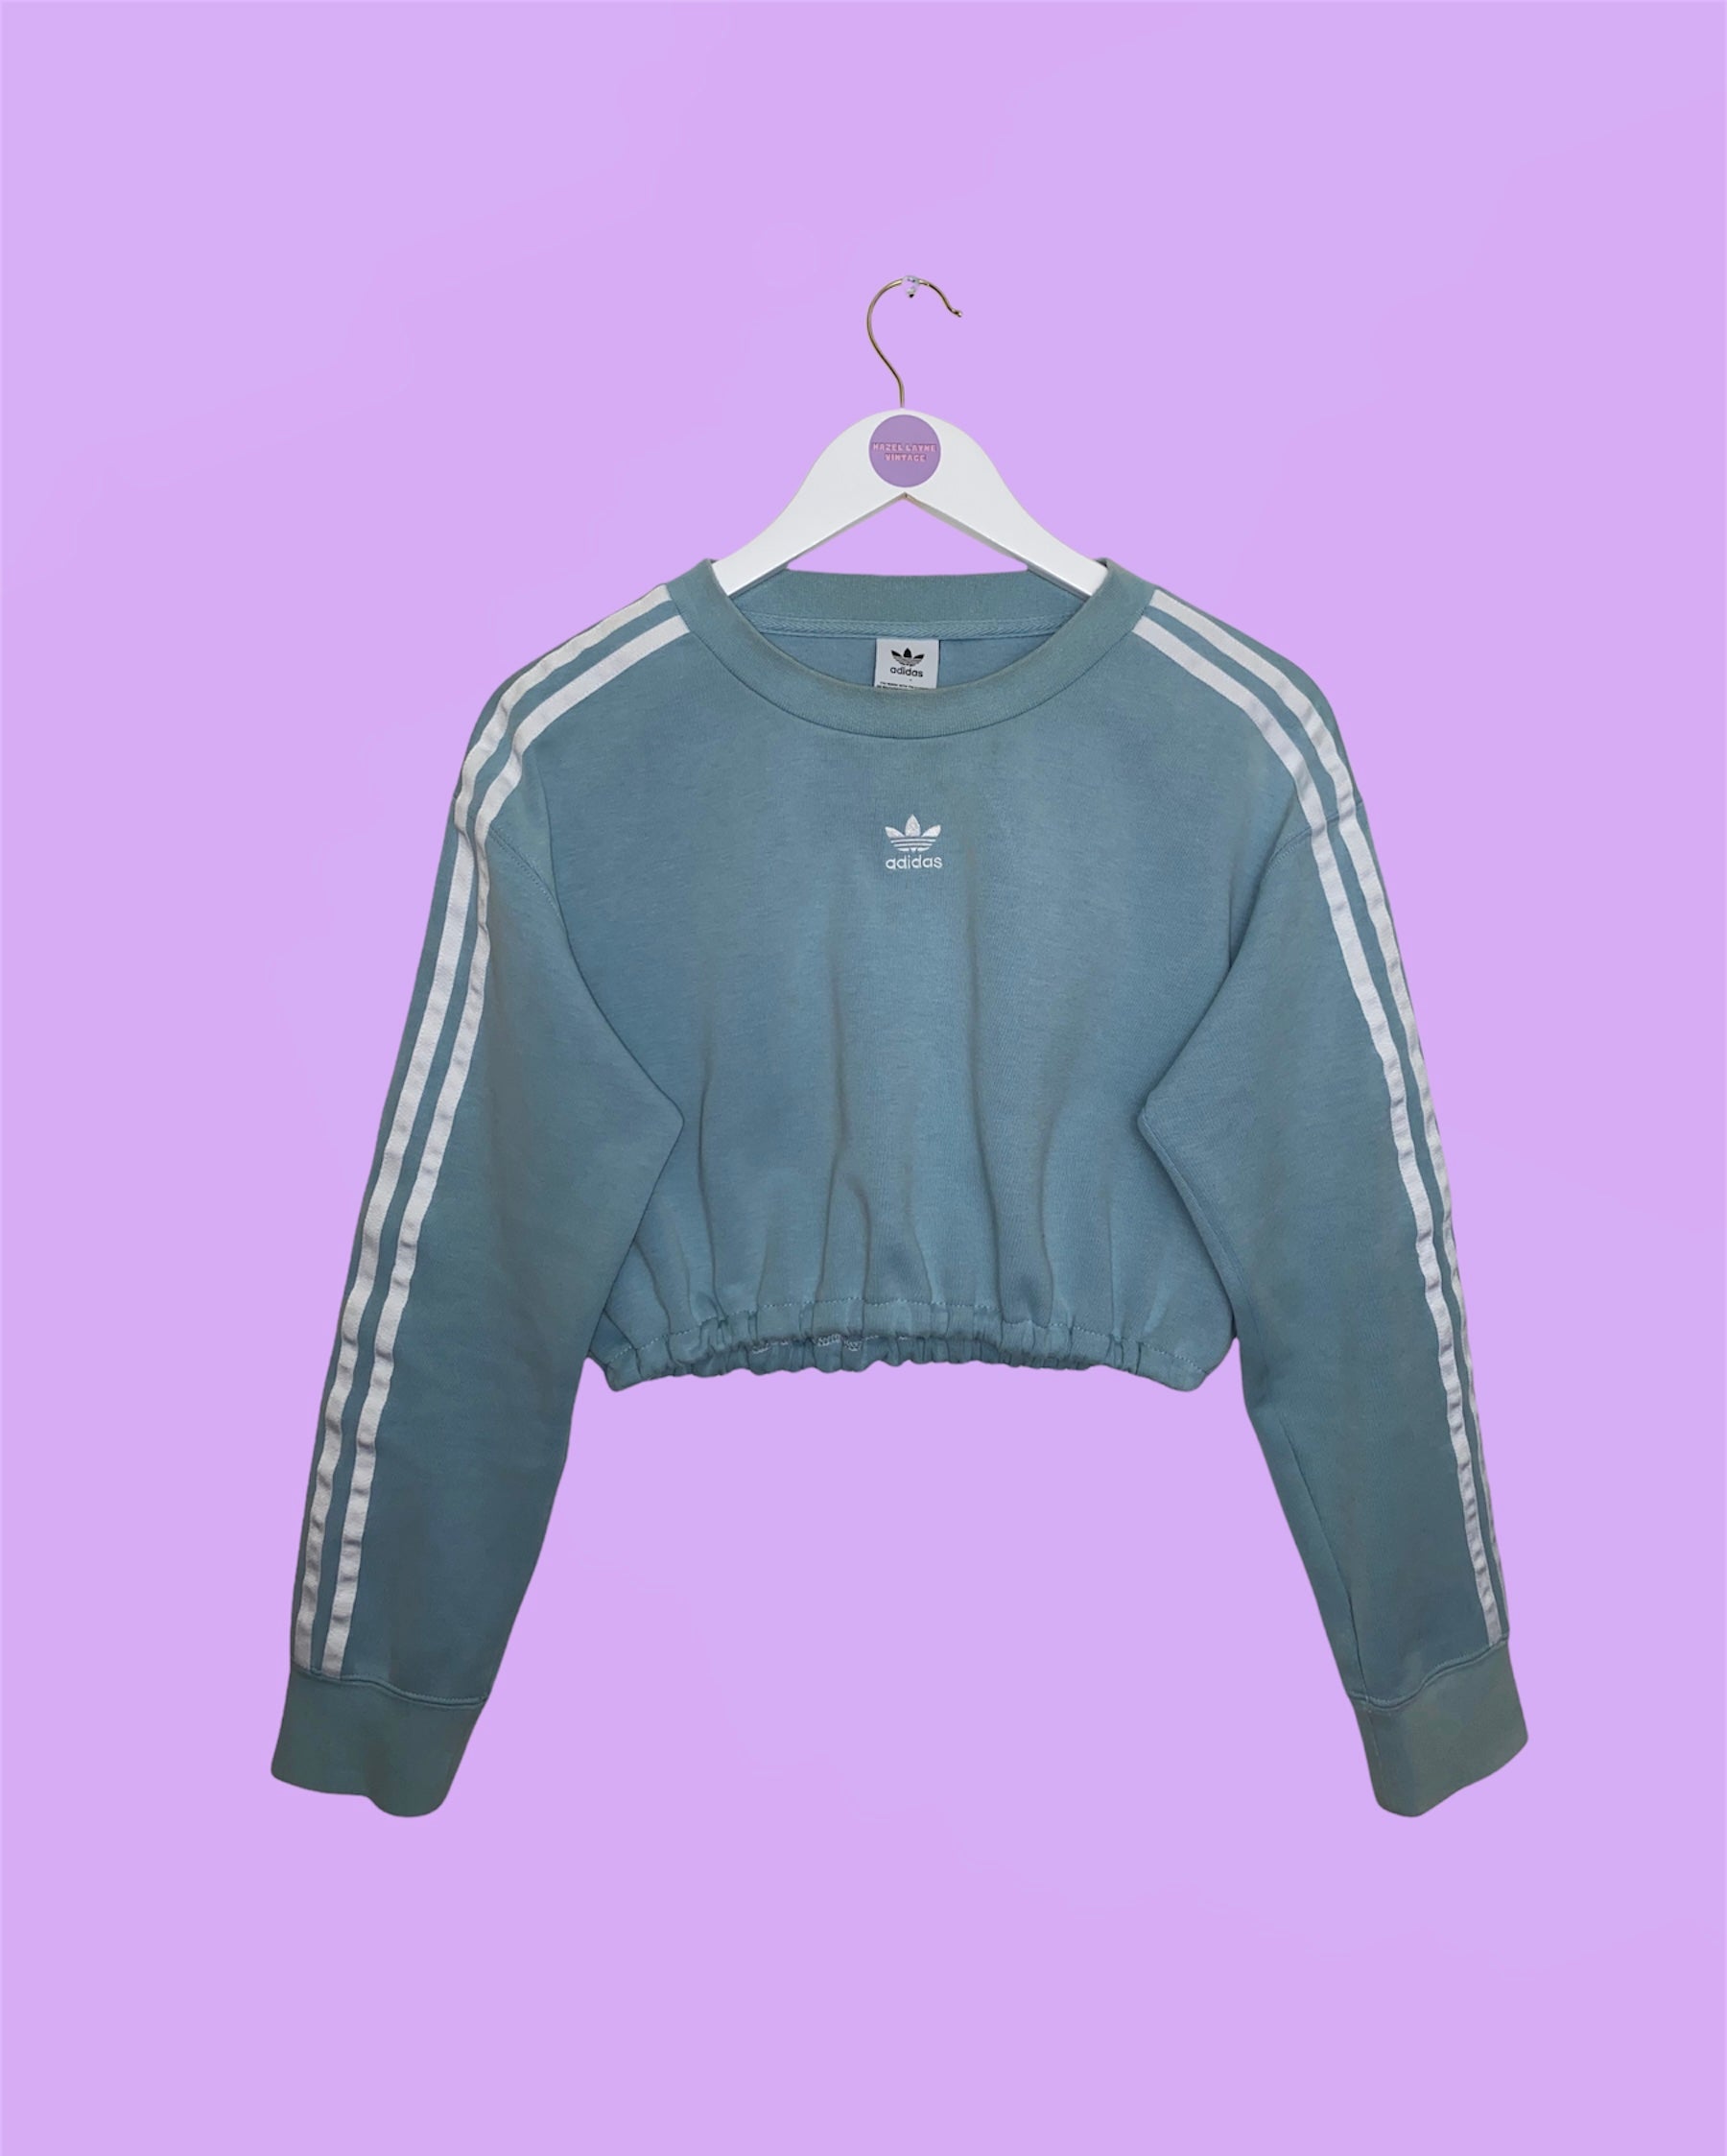 light blue cropped sweatshirt with white adidas logo on chest and 3 stripes on sleeves shown on a white clothes hanger on a lilac background